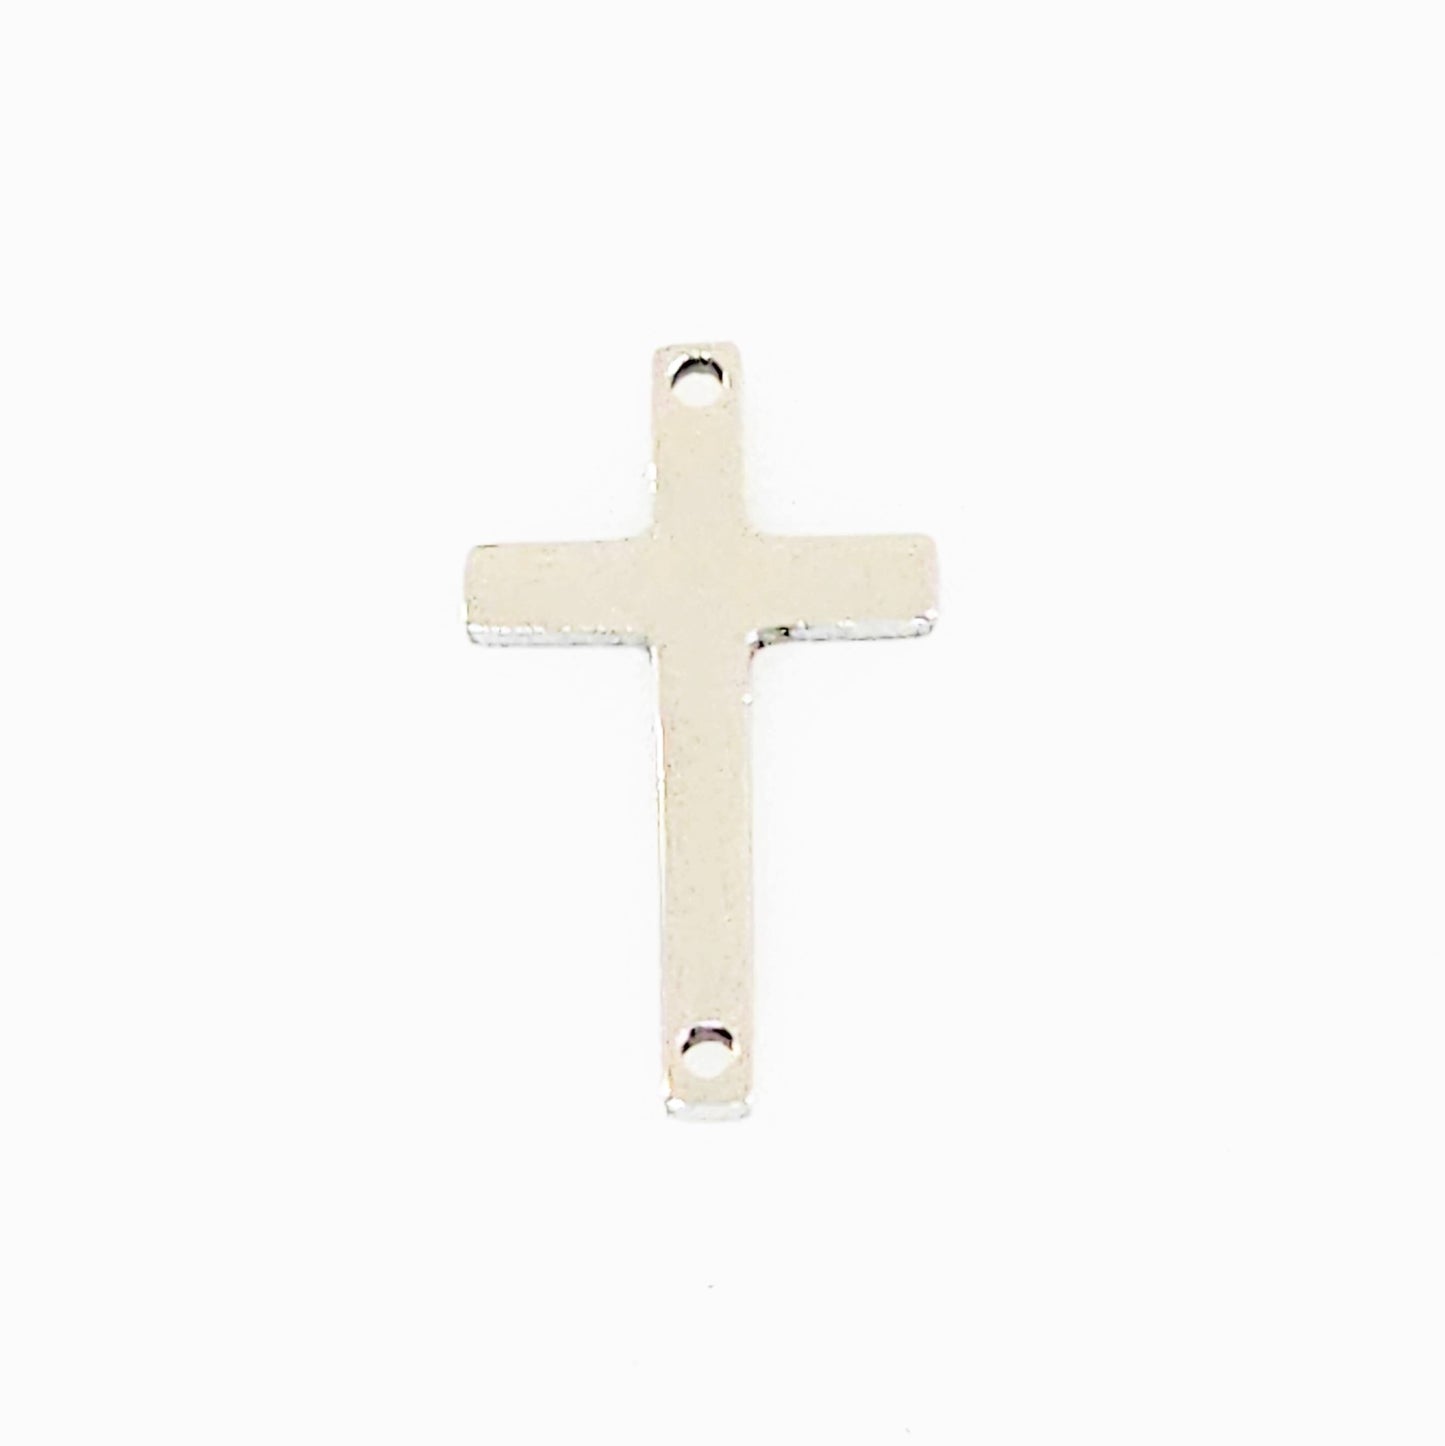 Stainless Steel Cross Charm - 11mm x 18mm